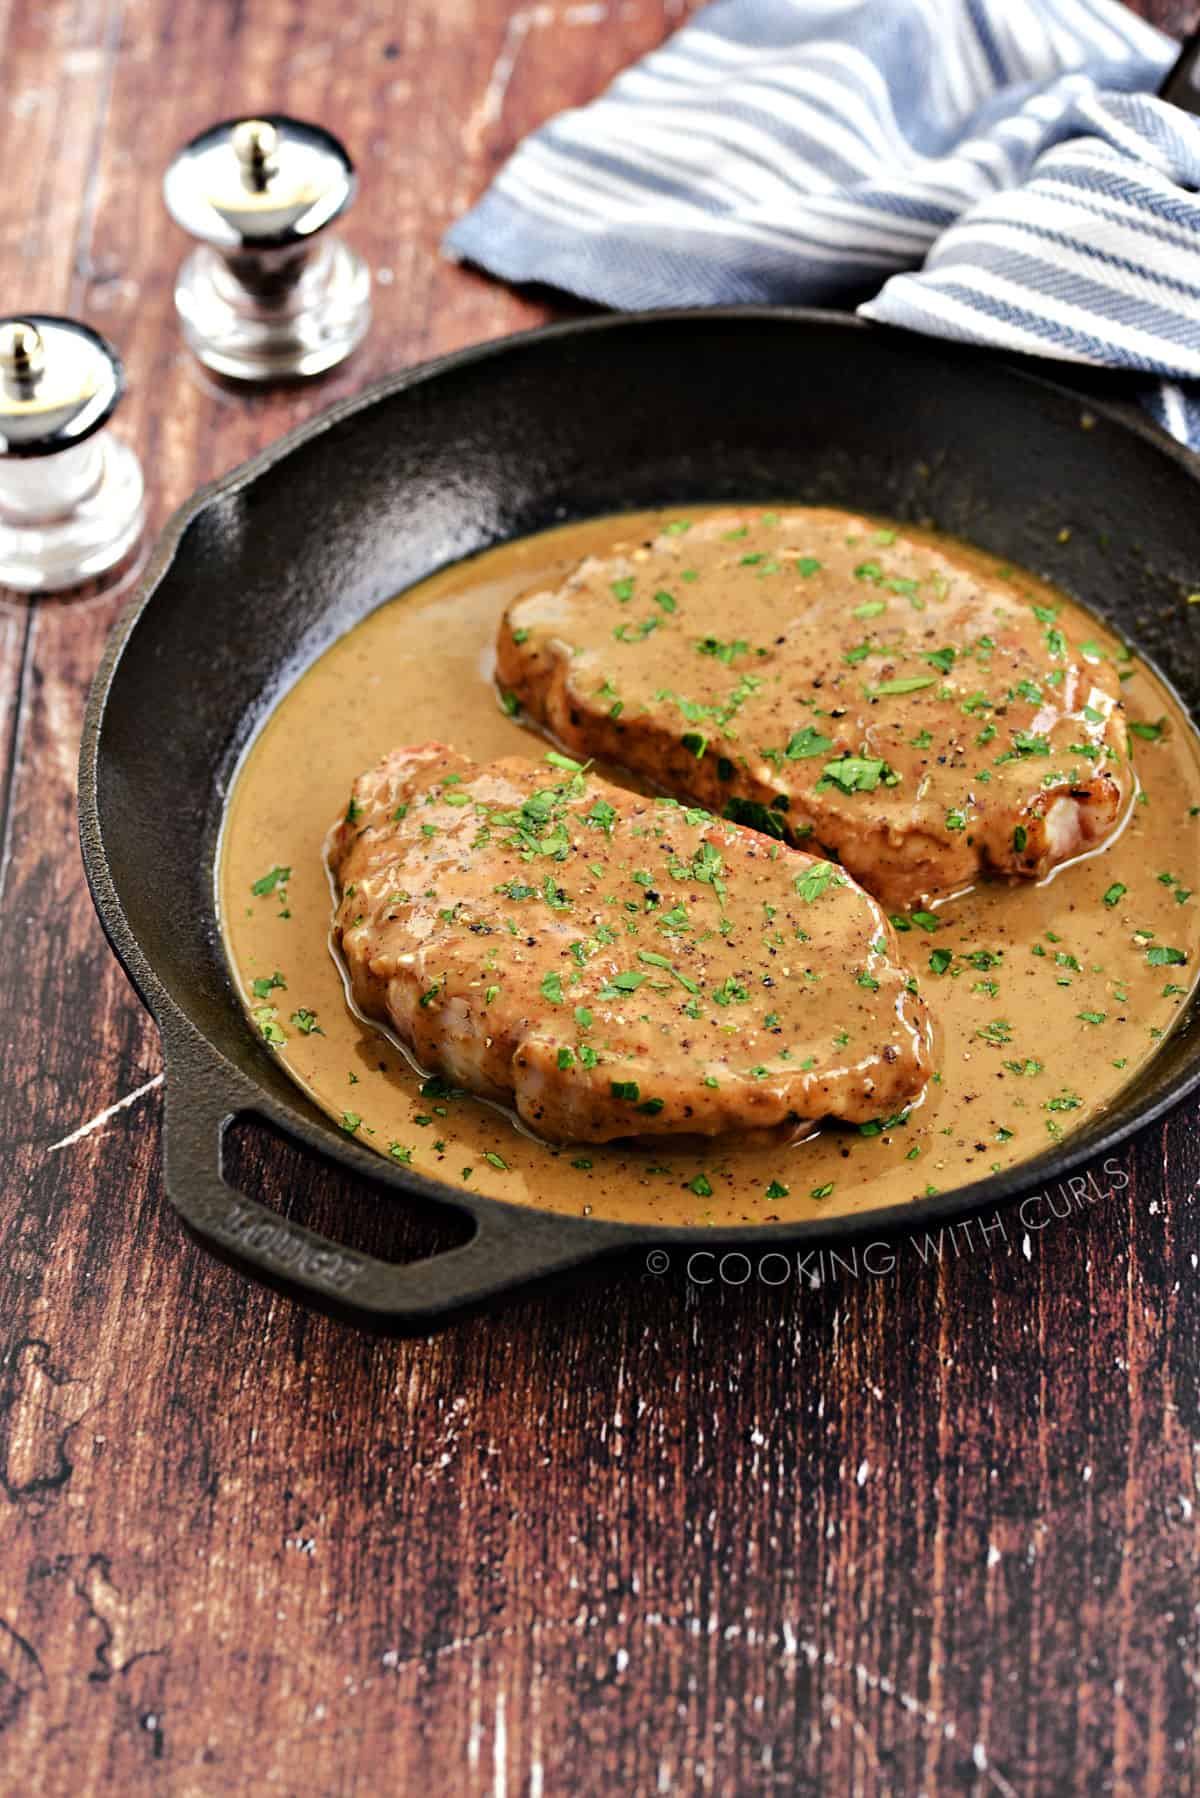 Two pork chops smothered with brown pan gravy in a cast iron skillet.